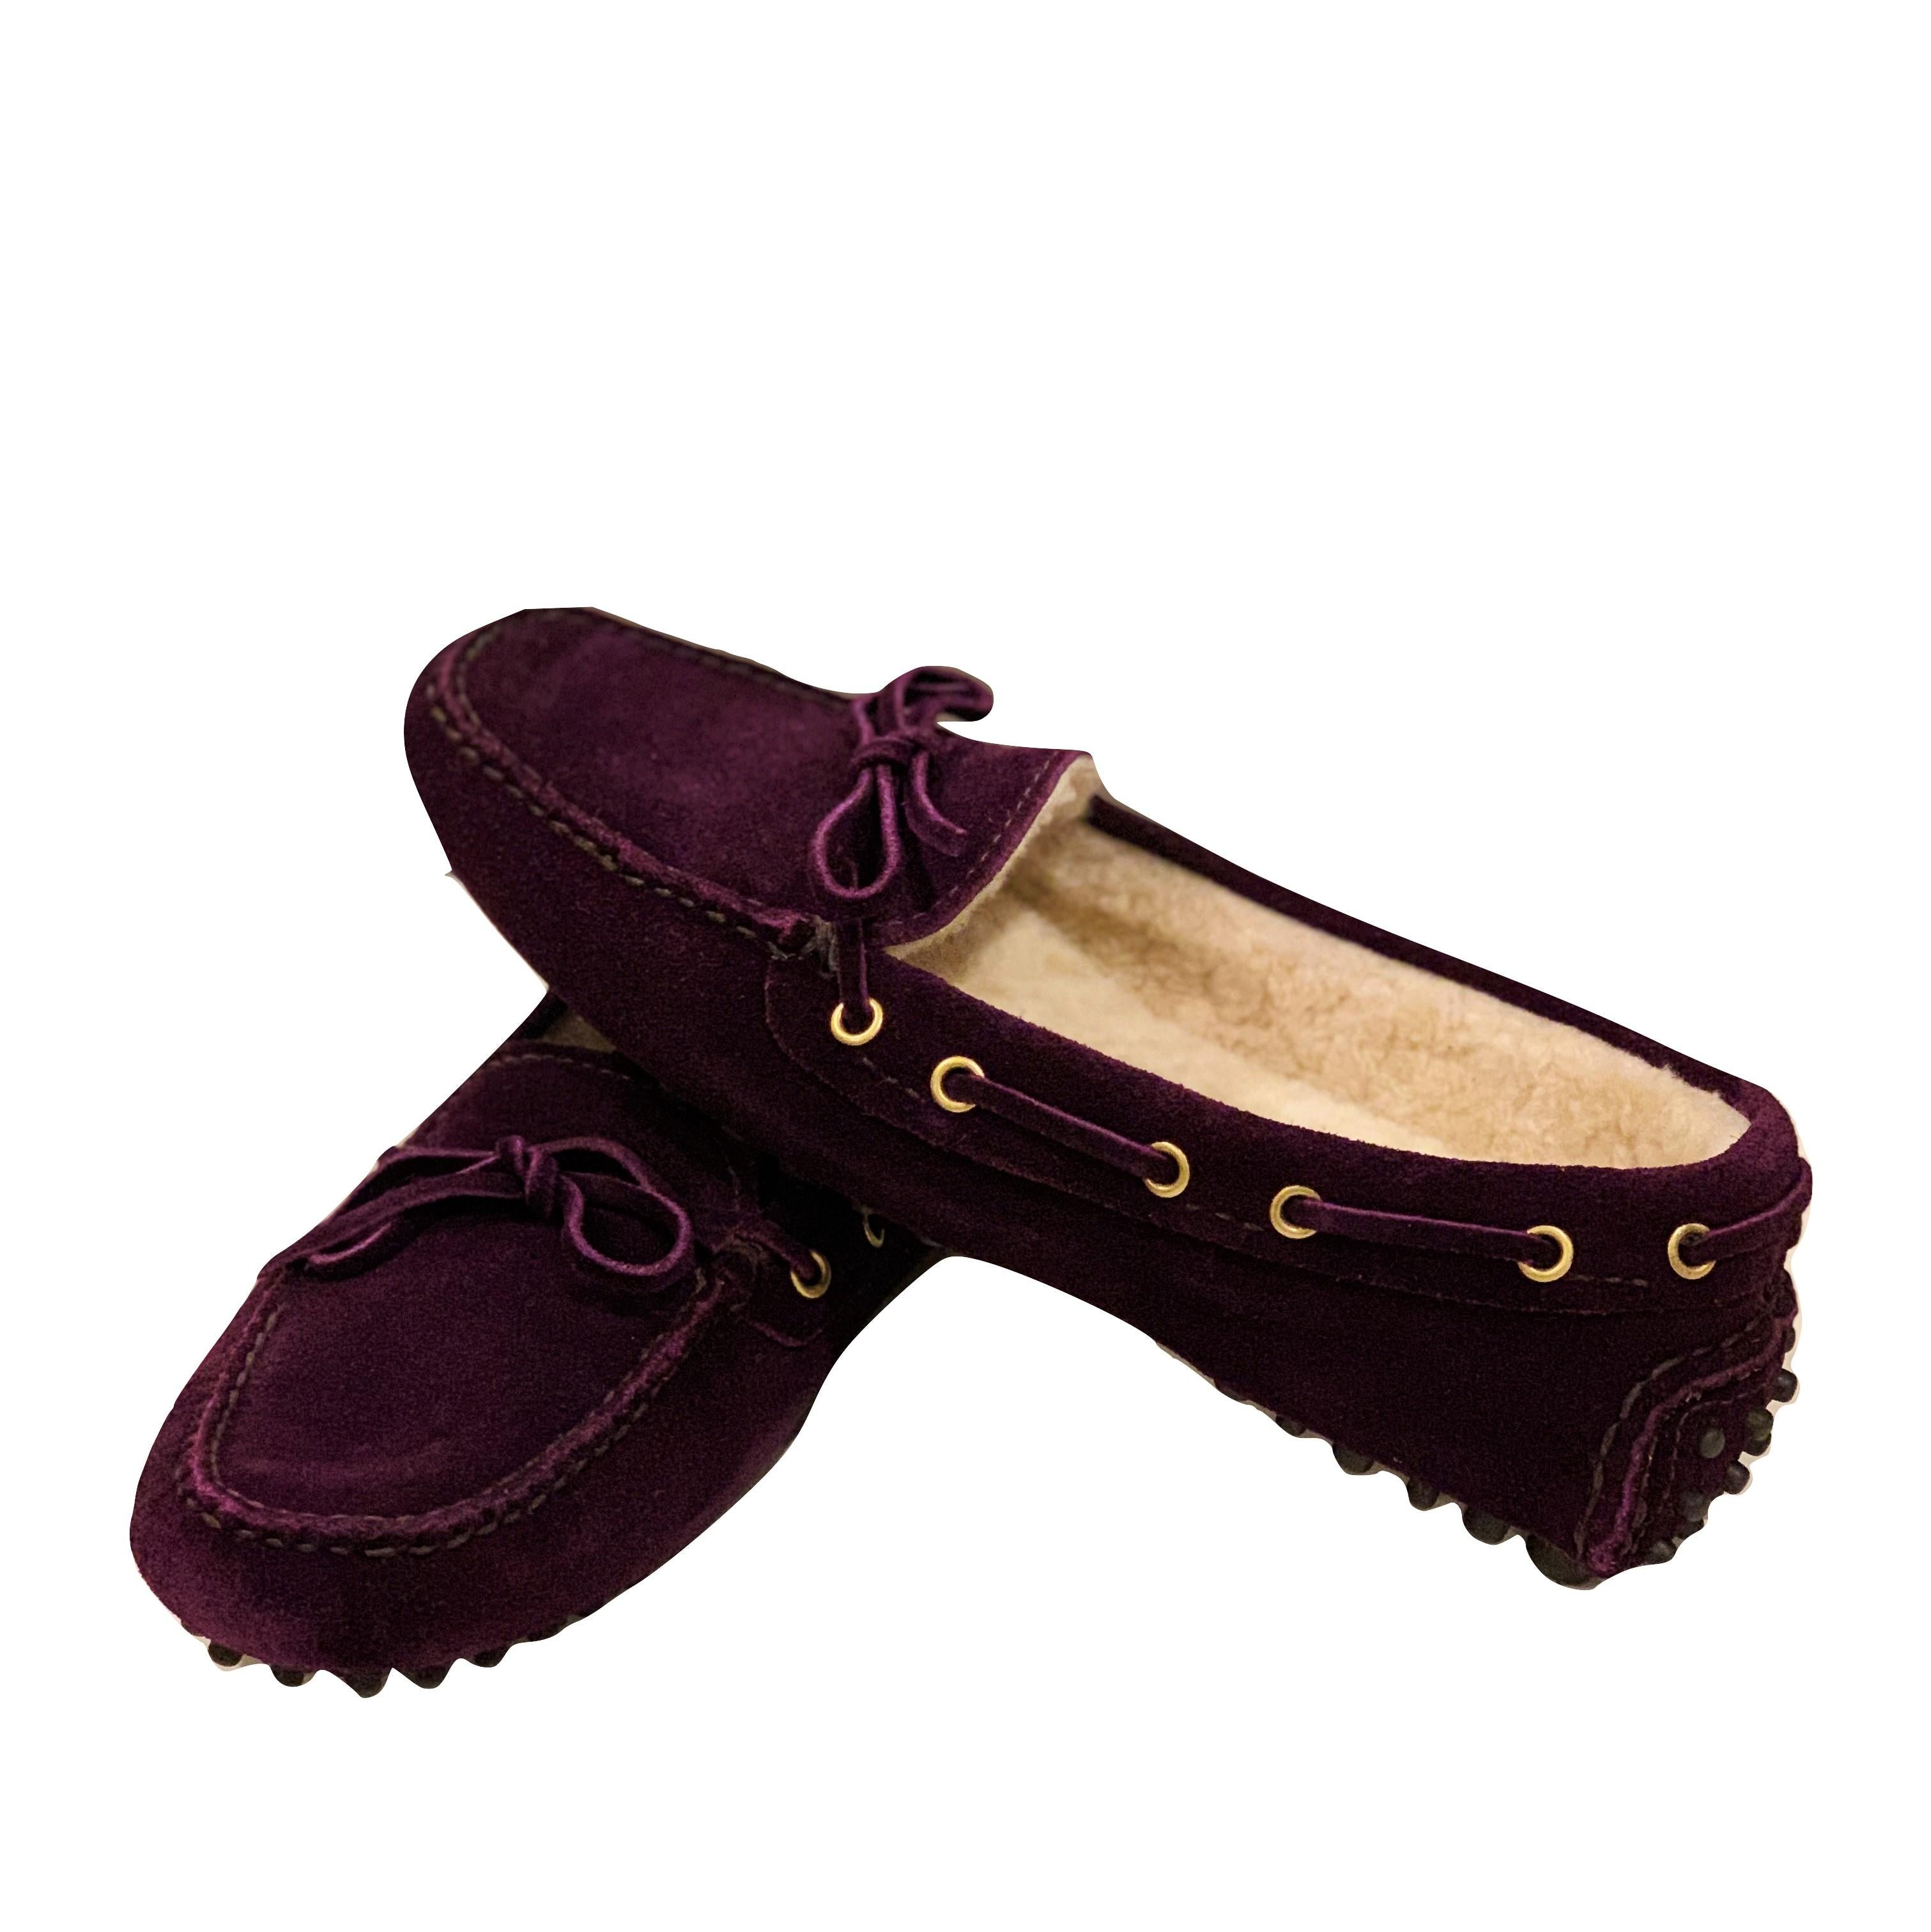  New The Original Prada Car Shoe Flat Moccasin Shearling House Driving  Sz 36.5 In New Condition In Leesburg, VA